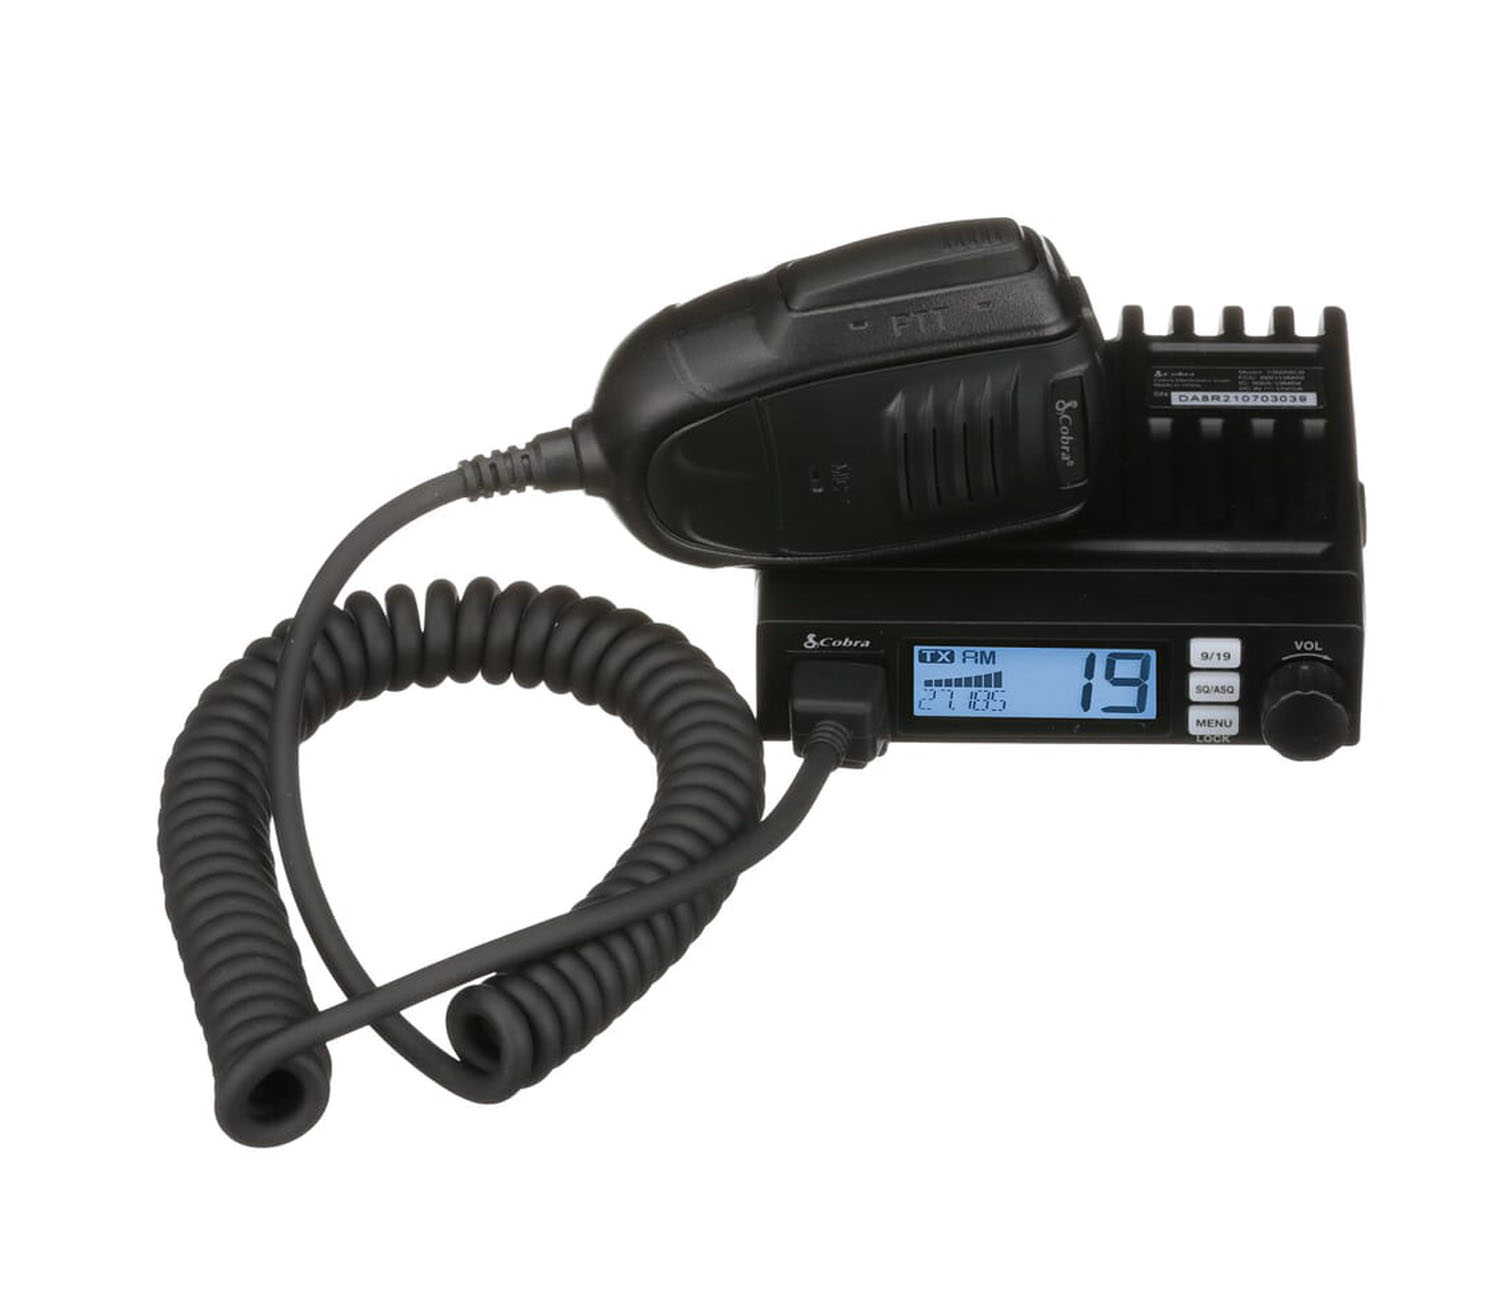 COBRA - 19MINI ULTRA-COMPACT 40 CHANNEL CB RADIO WITH HANDS FREE OPERATION